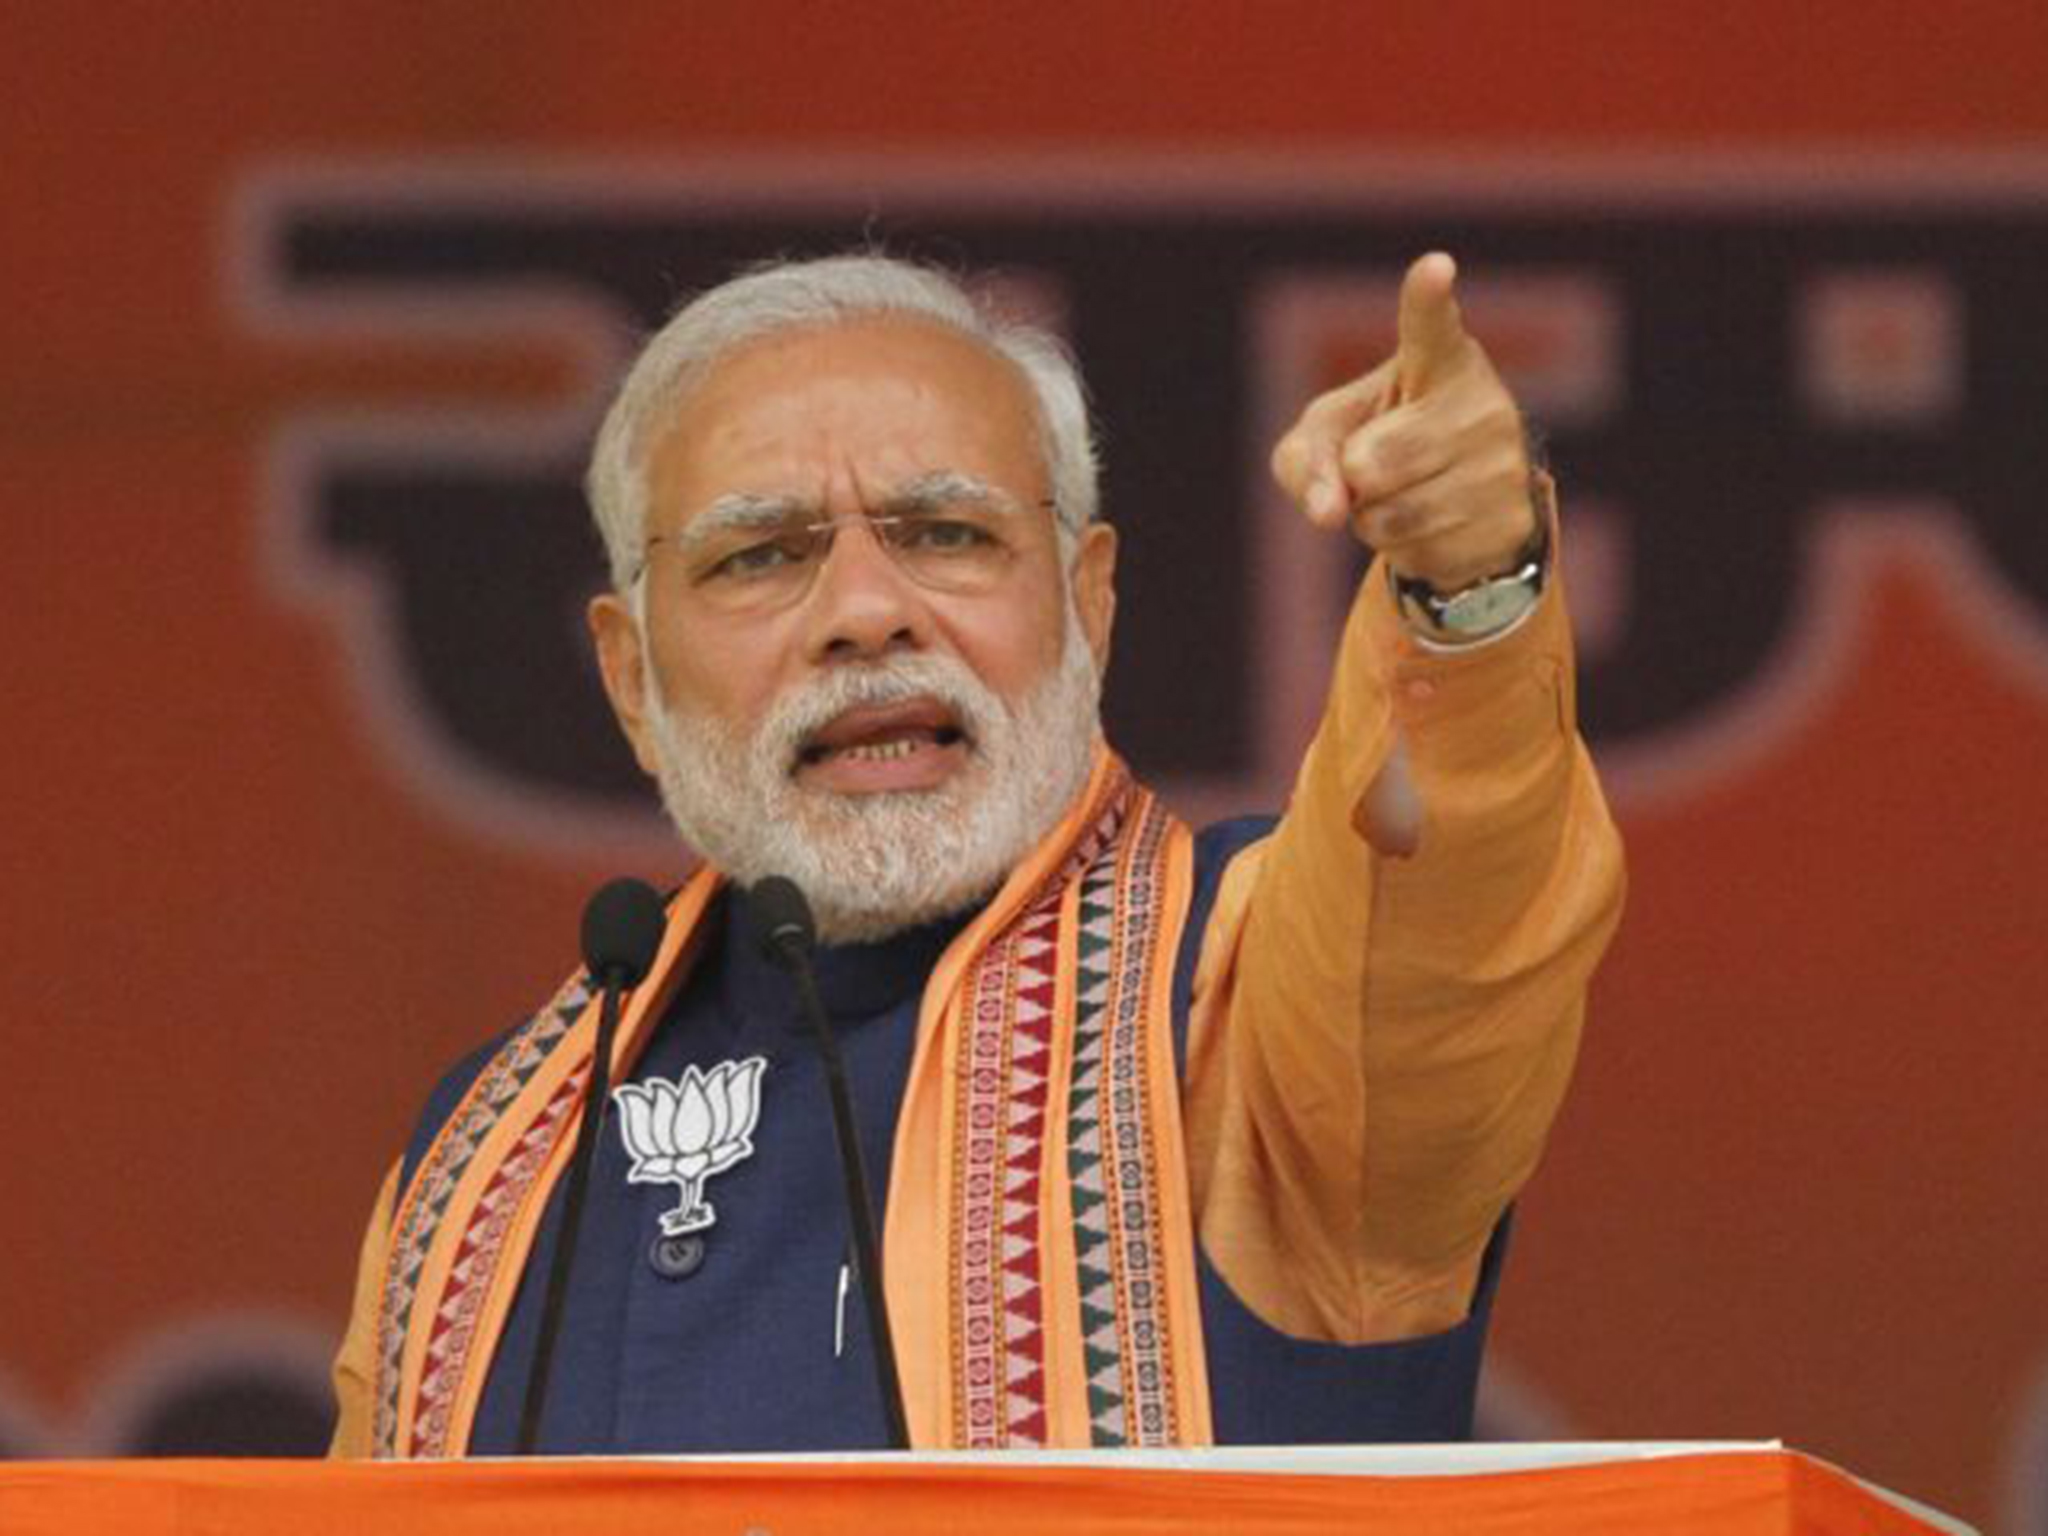 Narendra Modi and Vijay Sharma named to Time’s 100 Most Influential